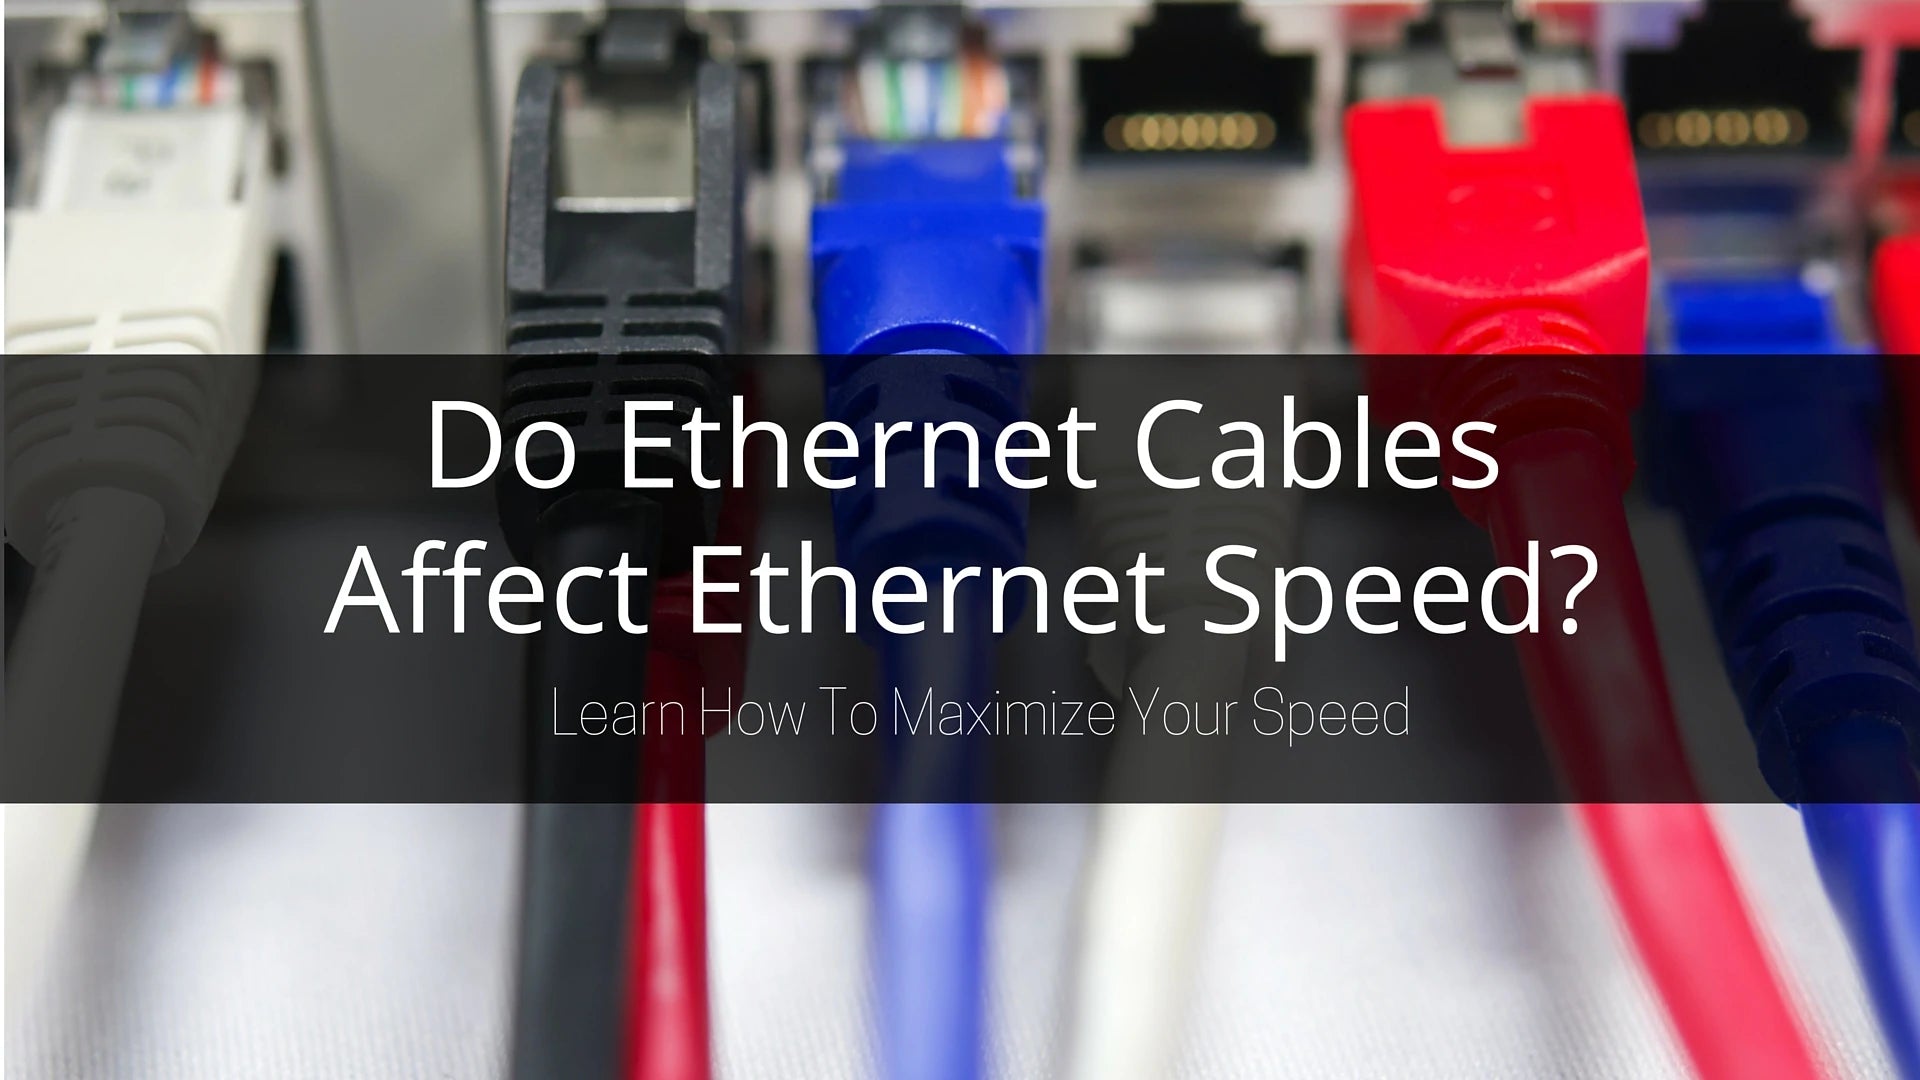 Do Different Ethernet Cables Affect Your Ethernet Speed?